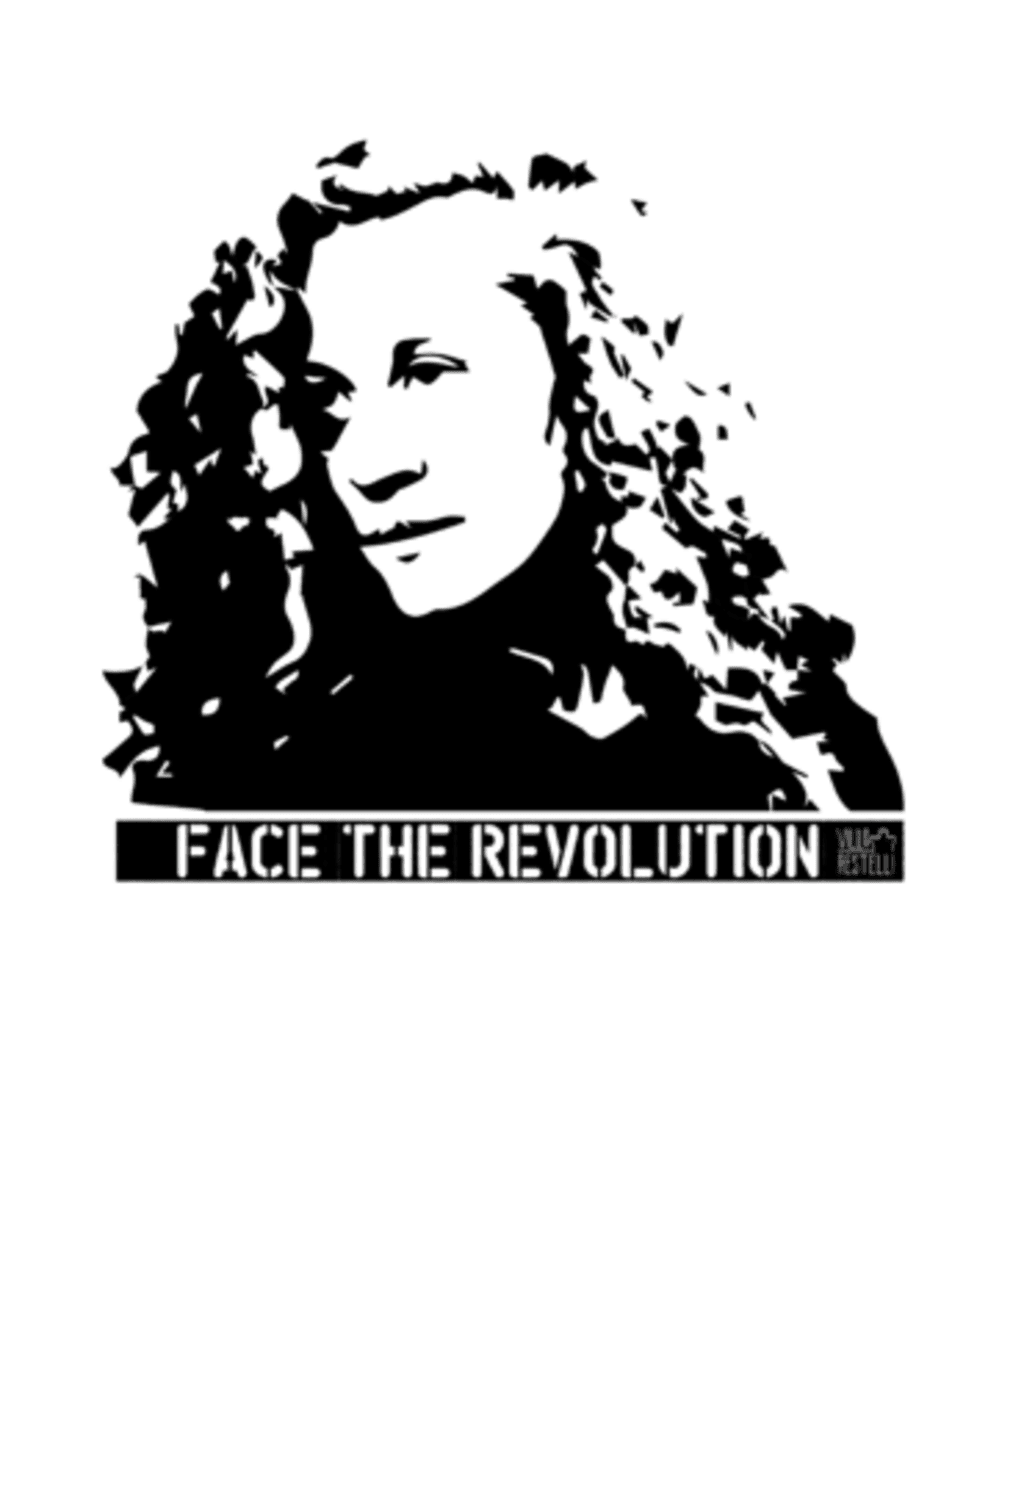 *Face the revolution* - AHED TAMIMI